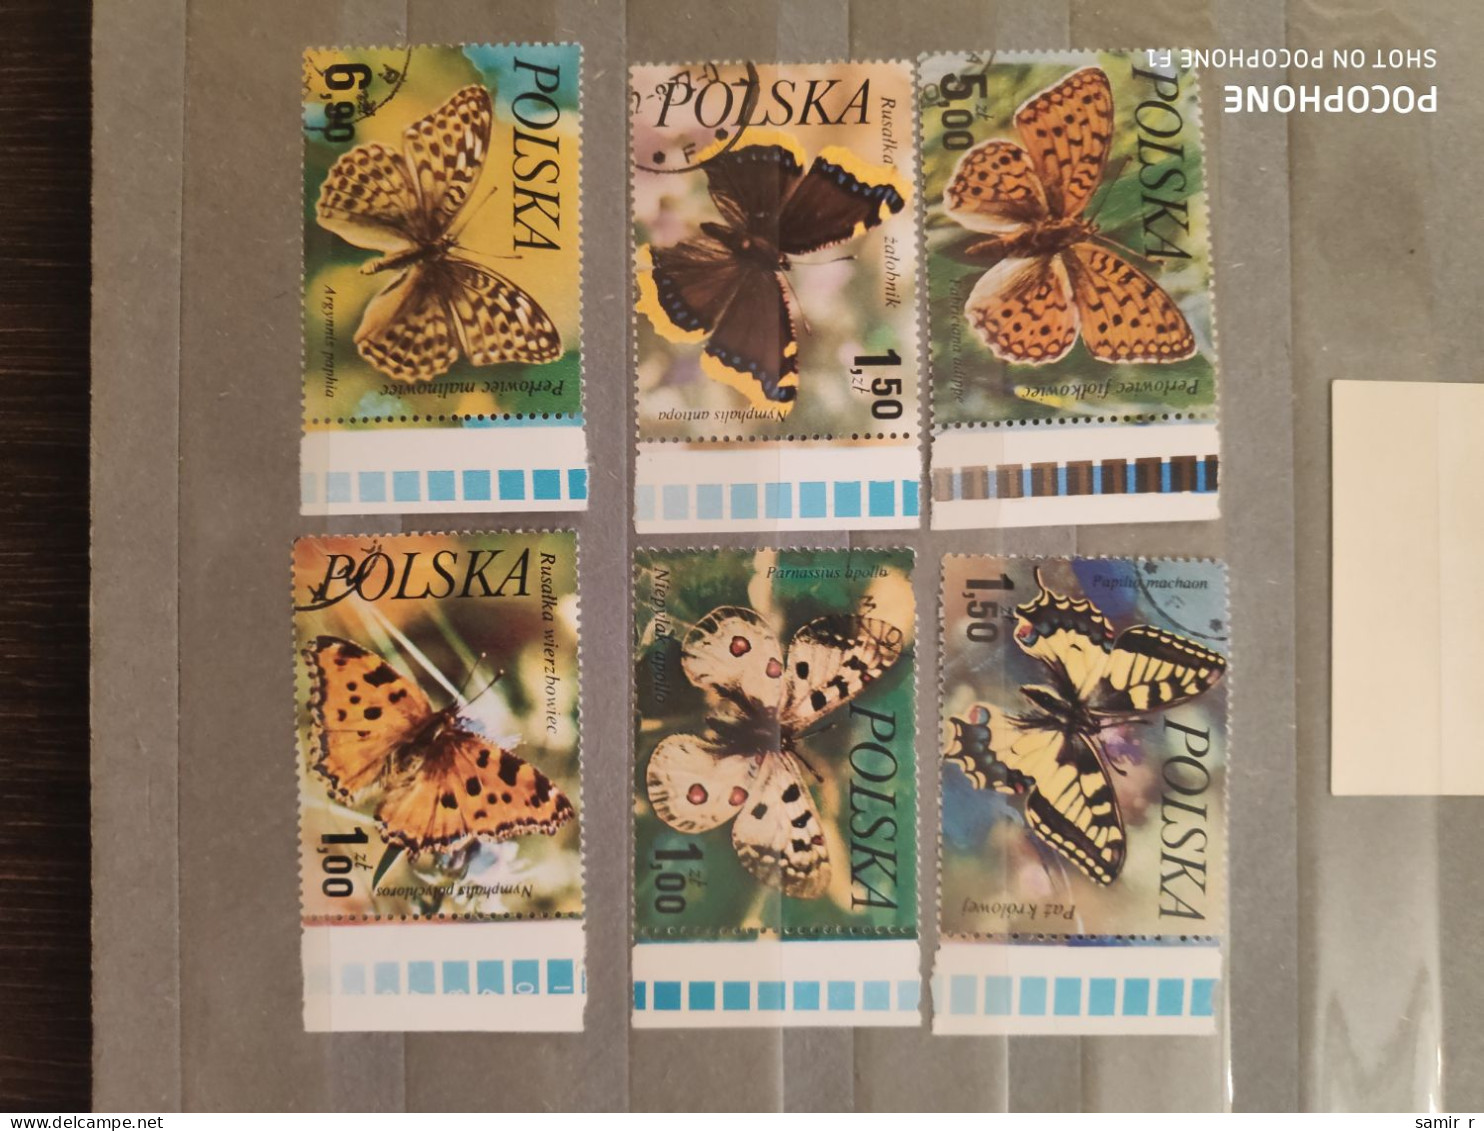 Poland	Butterflies (F85) - Used Stamps